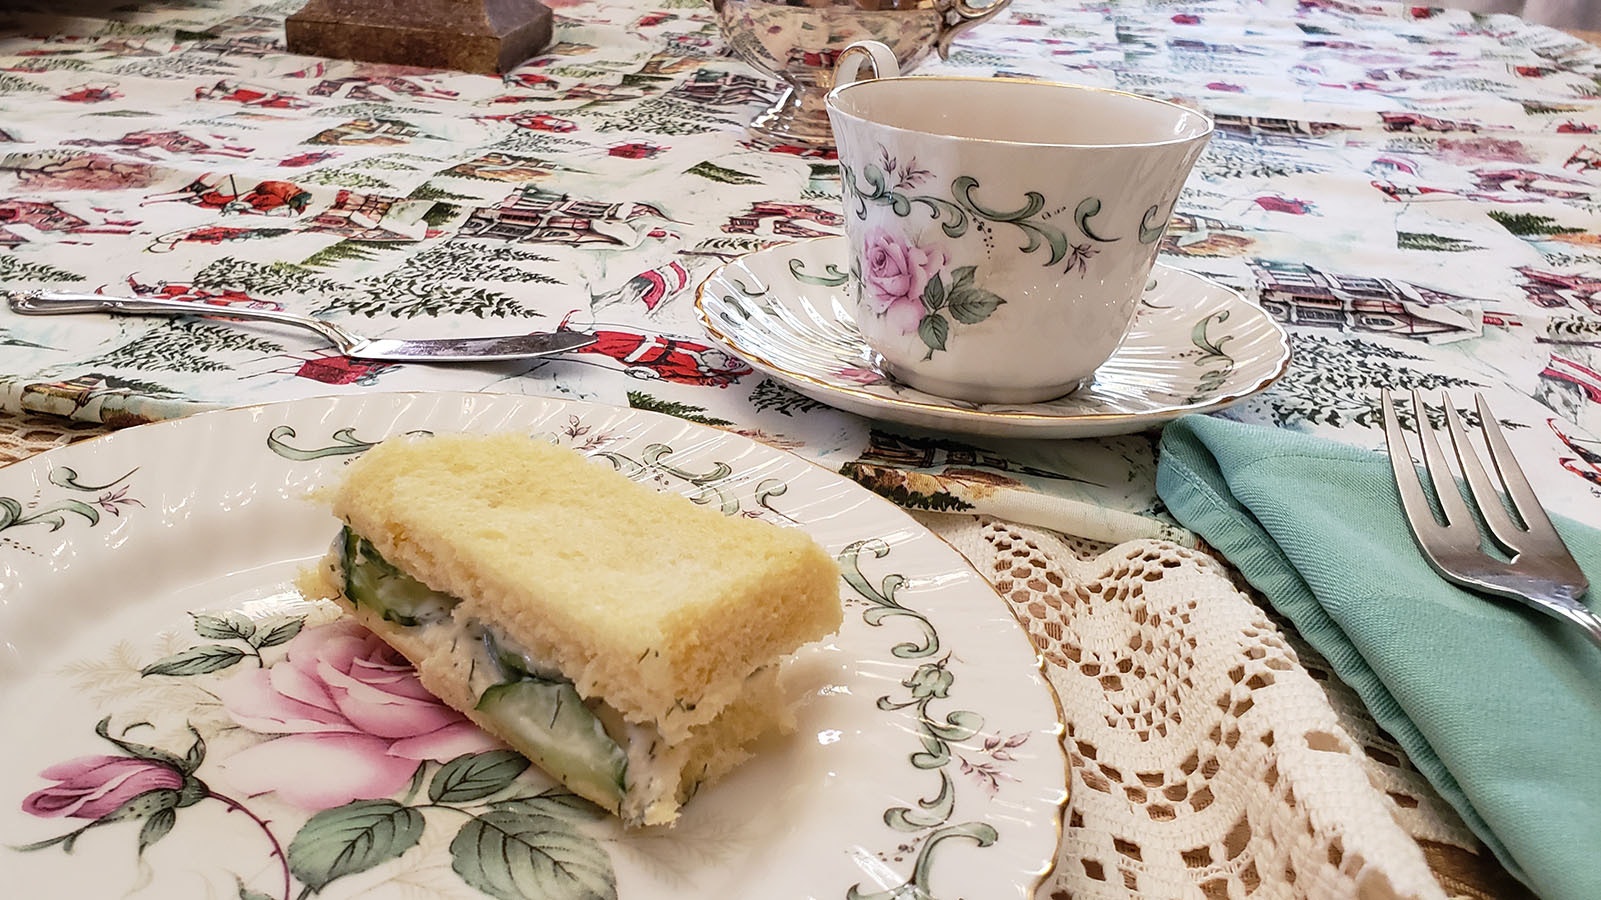 Dainty cucumber sandwiches are one of three available on the menu for the Nagle-Warren Mansion's afternoon teas.